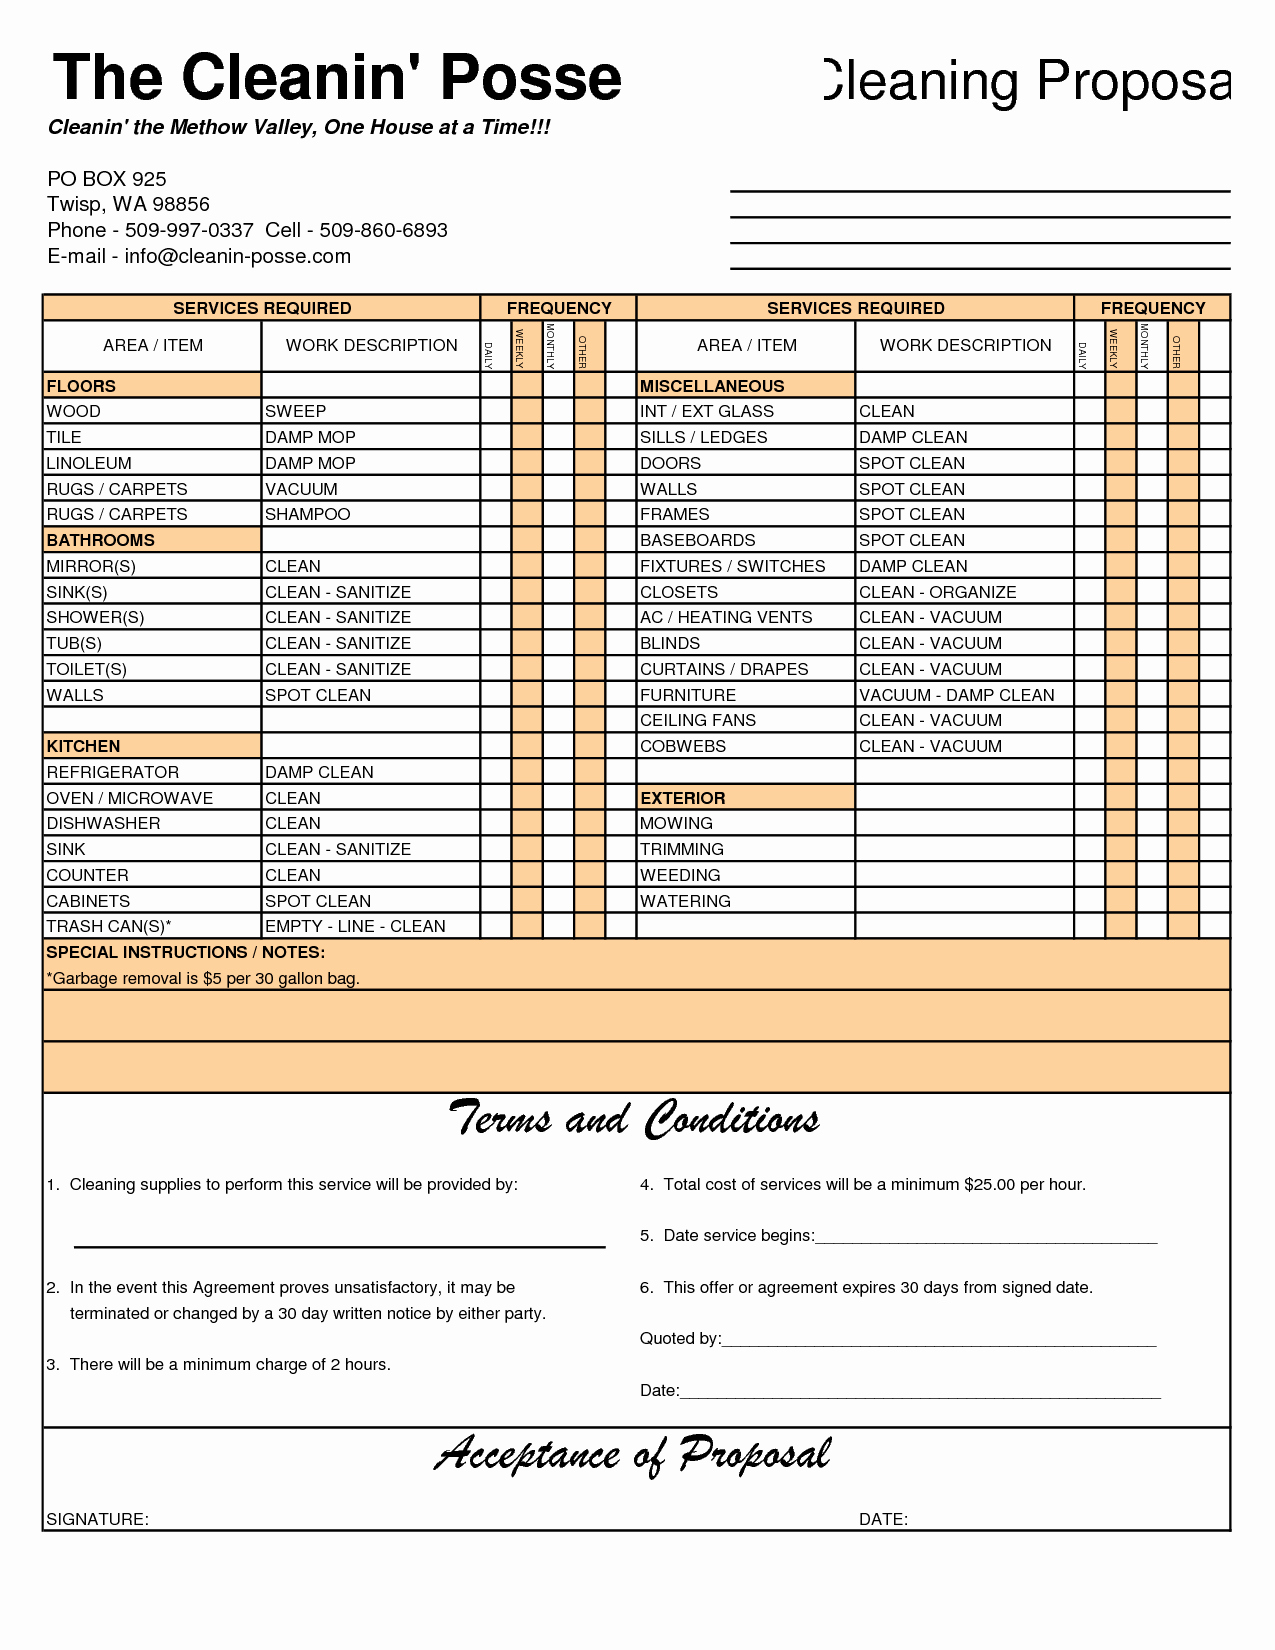 Cleaning Business Checklist Template Awesome Pin by Melba On M&amp;n Cleaning forms